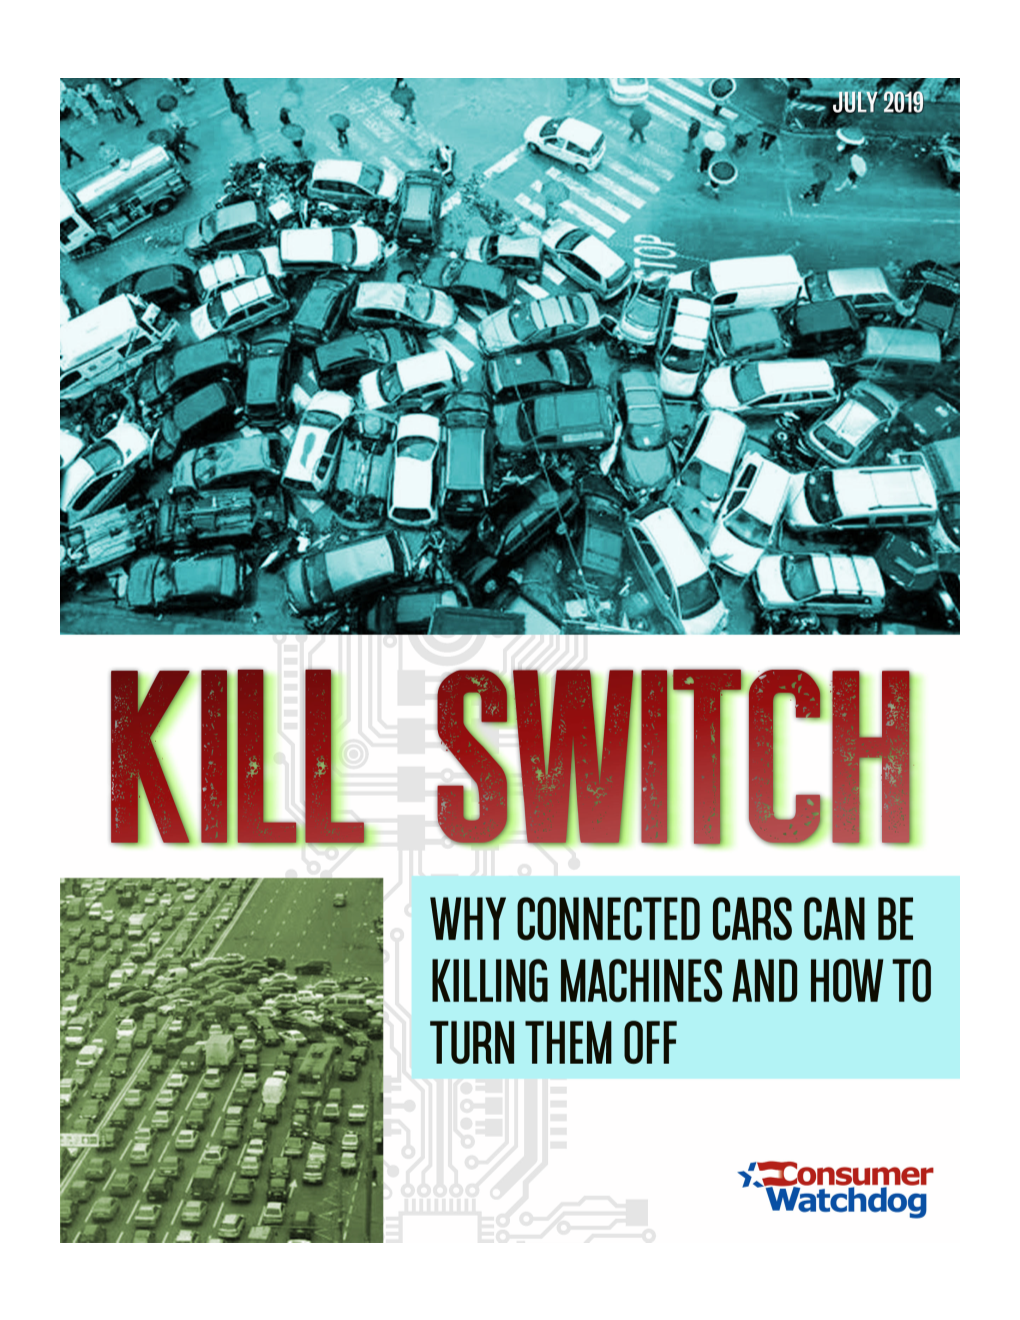 Kill Switch,” Reﬂects the Consensus Concerns of These Industry Technologists About the Security Design ﬂaws in the New ﬂeet of Connected Cars